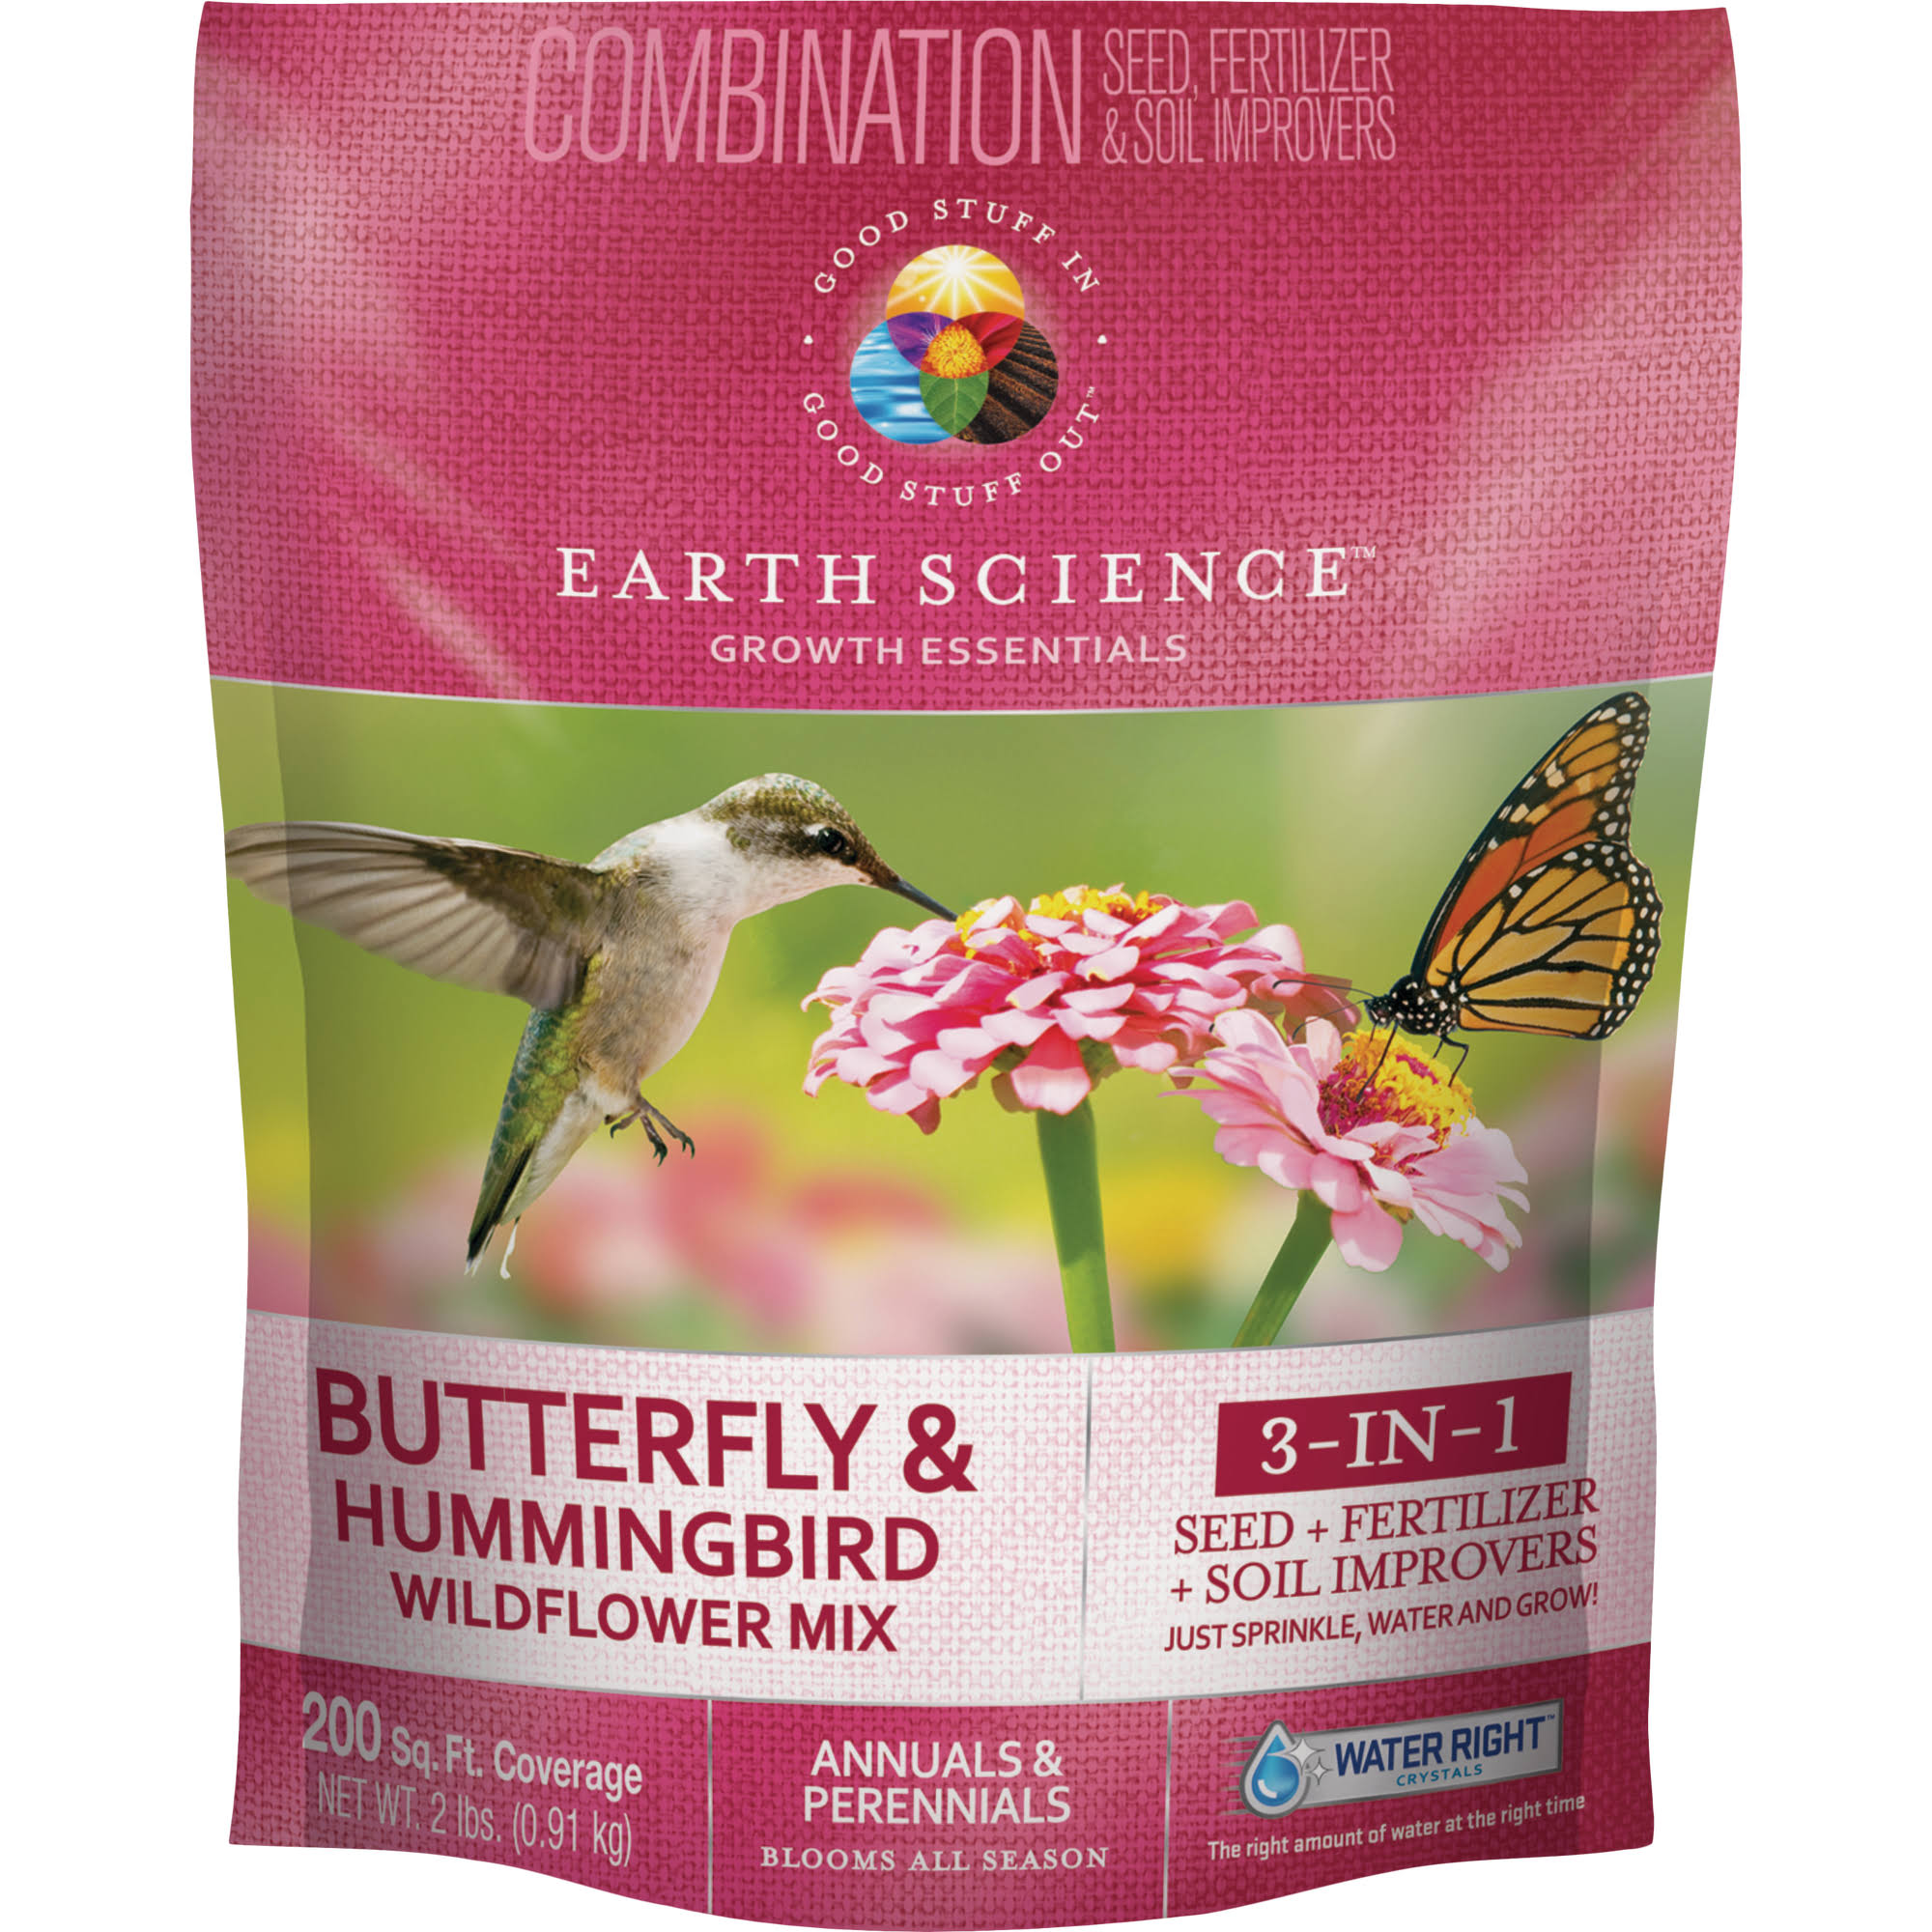 Earth Science Butterfly & Hummingbird Wildflower Mix Covers 200 Sq. Ft. 2-Lbs. 12138-6